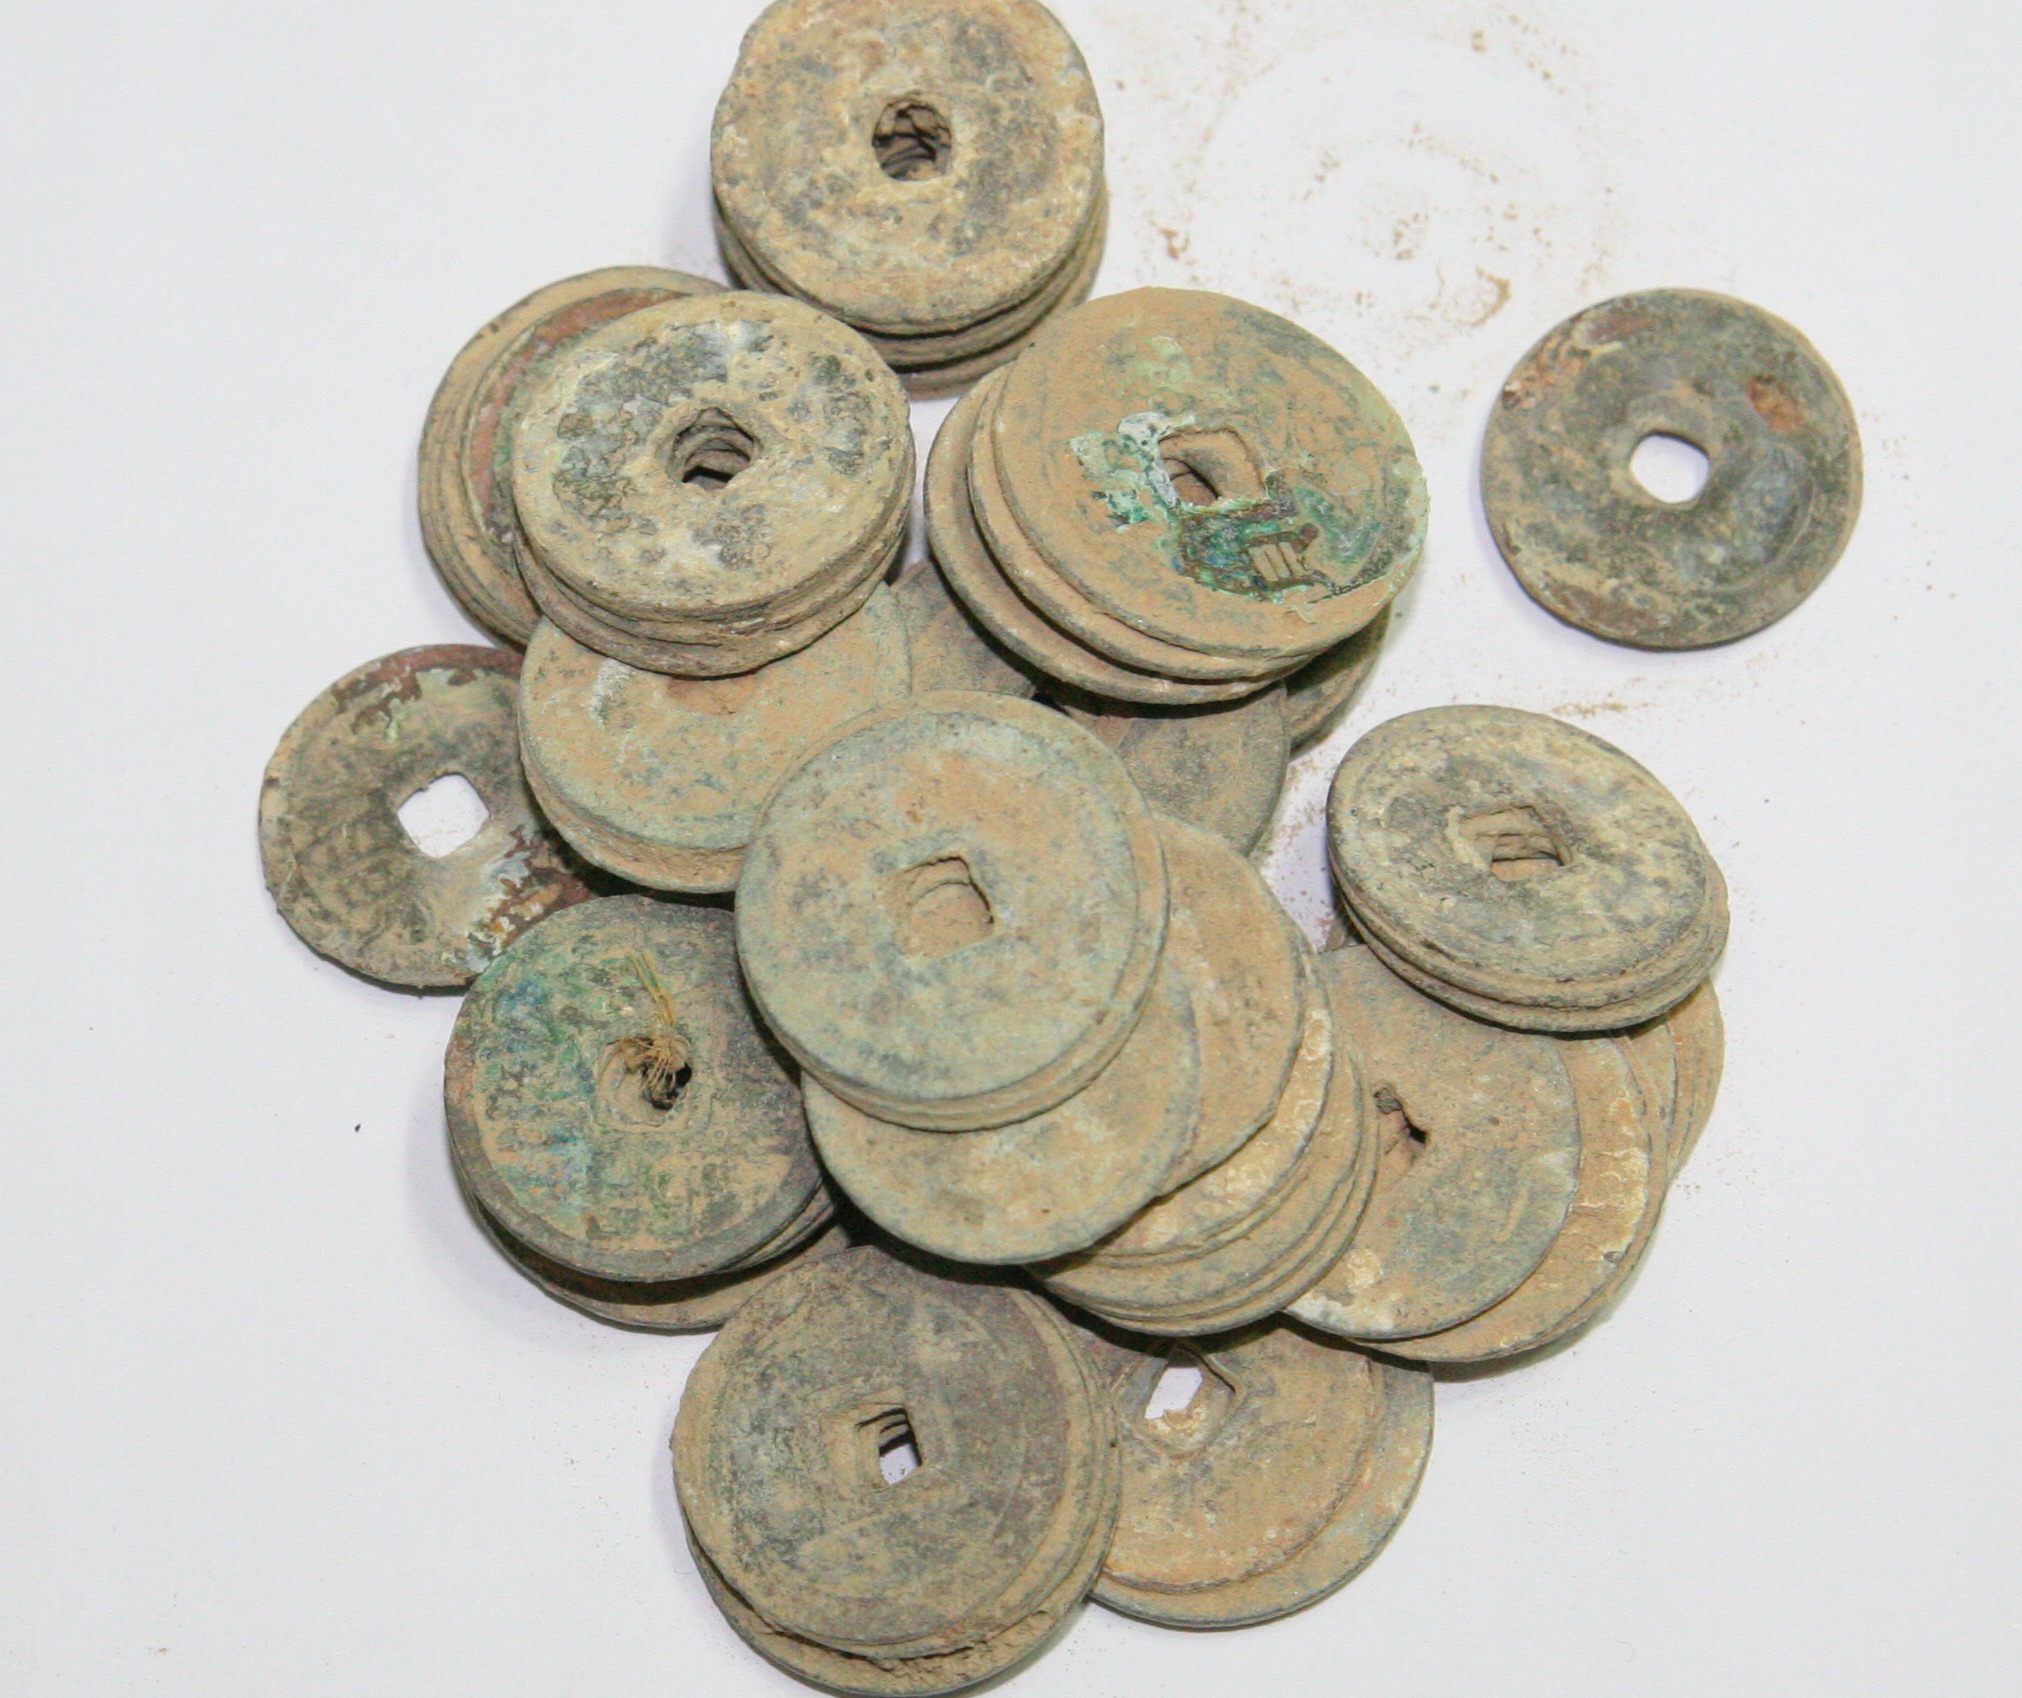 K7260, Annam (Vietnam) Uncleaned Coins in Clumps, AD 1800's, 0.25 Kg